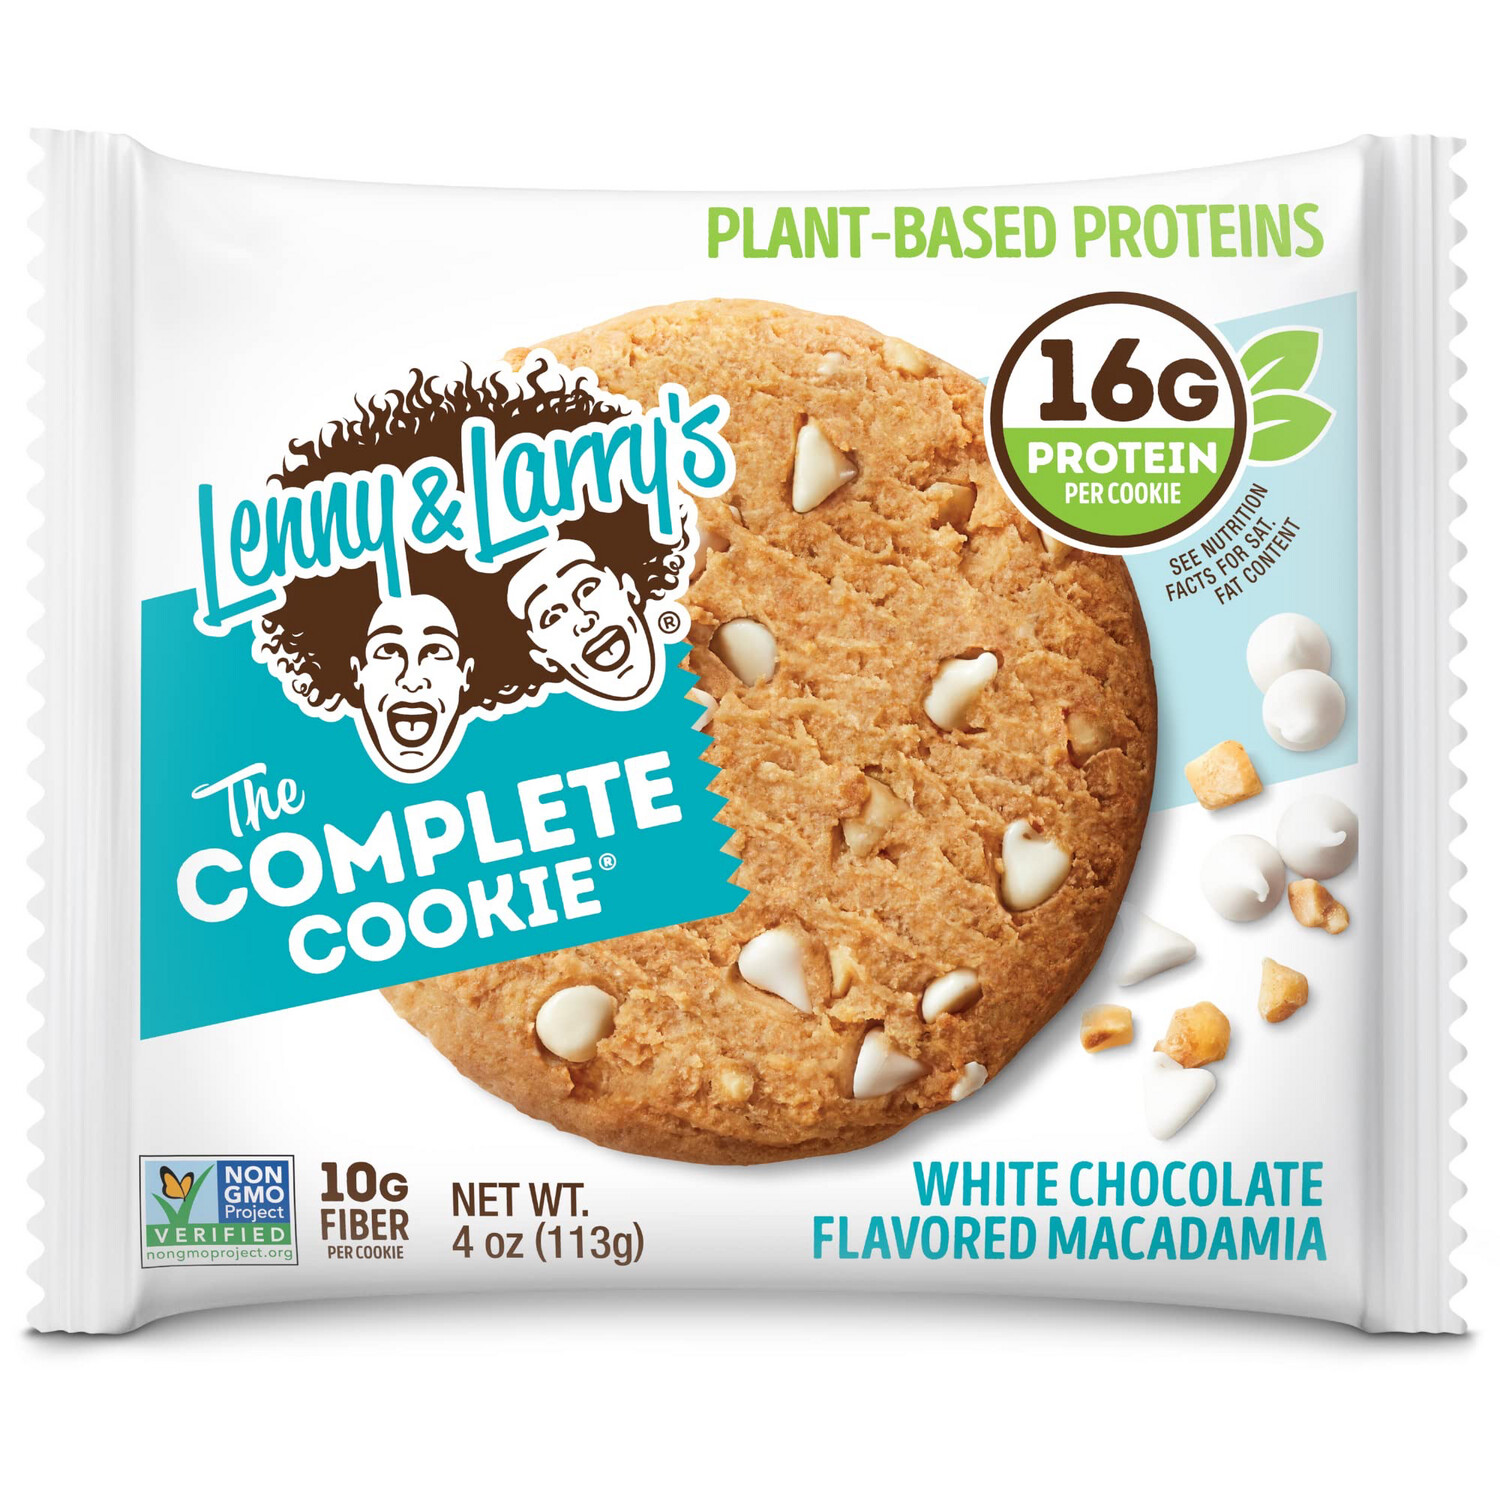 Lenny & Larry’s The Complete Cookie White Chocolate Macadamia Plant Based 16 g Protein Vegan 